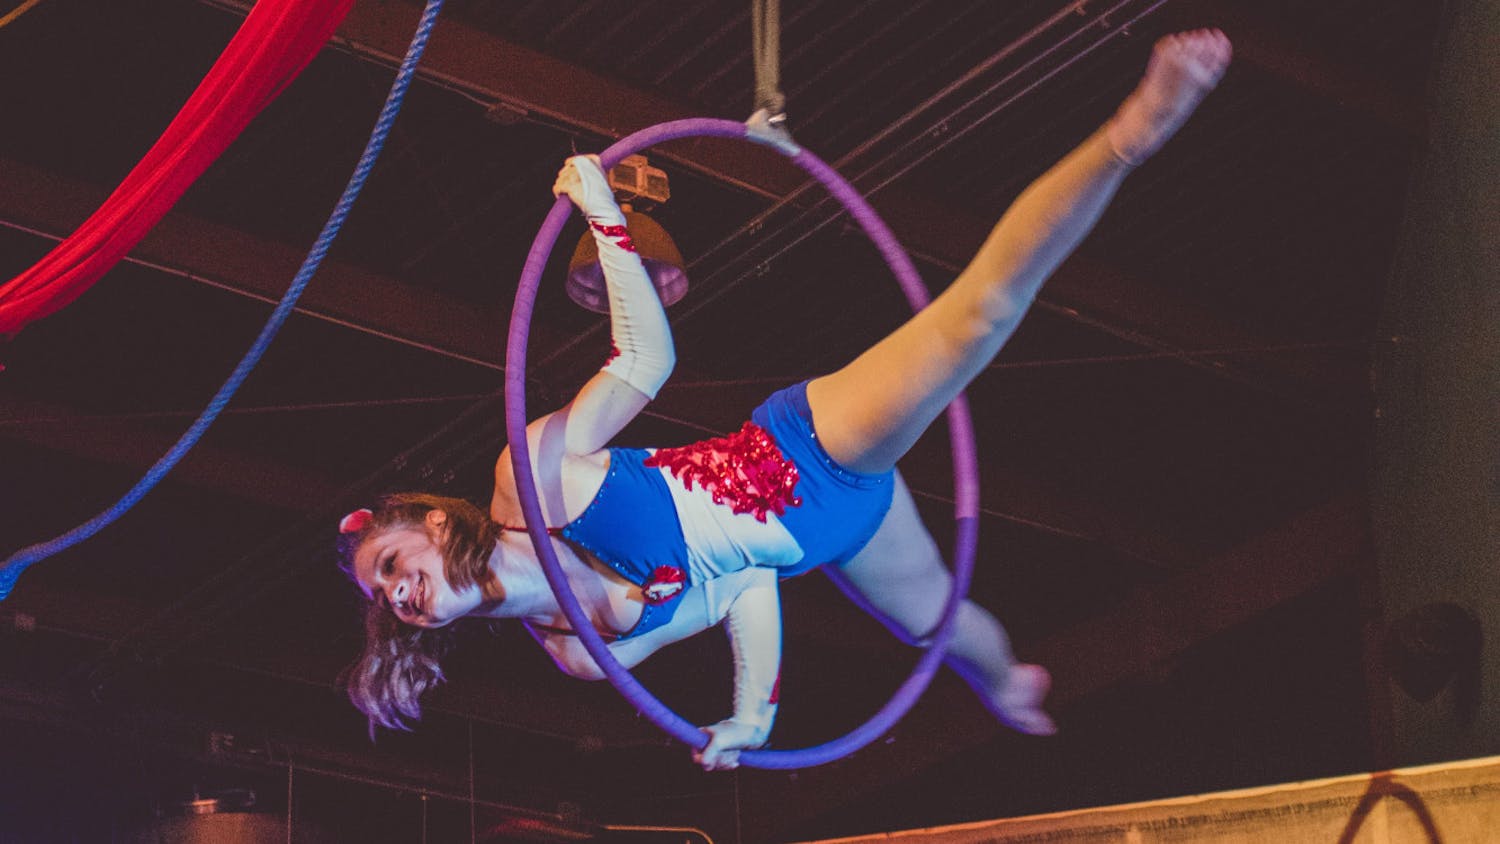 Dusty’s Drive-In Circus sets acrobatic artistry to a soundtrack of ragtime covers of pop songs.